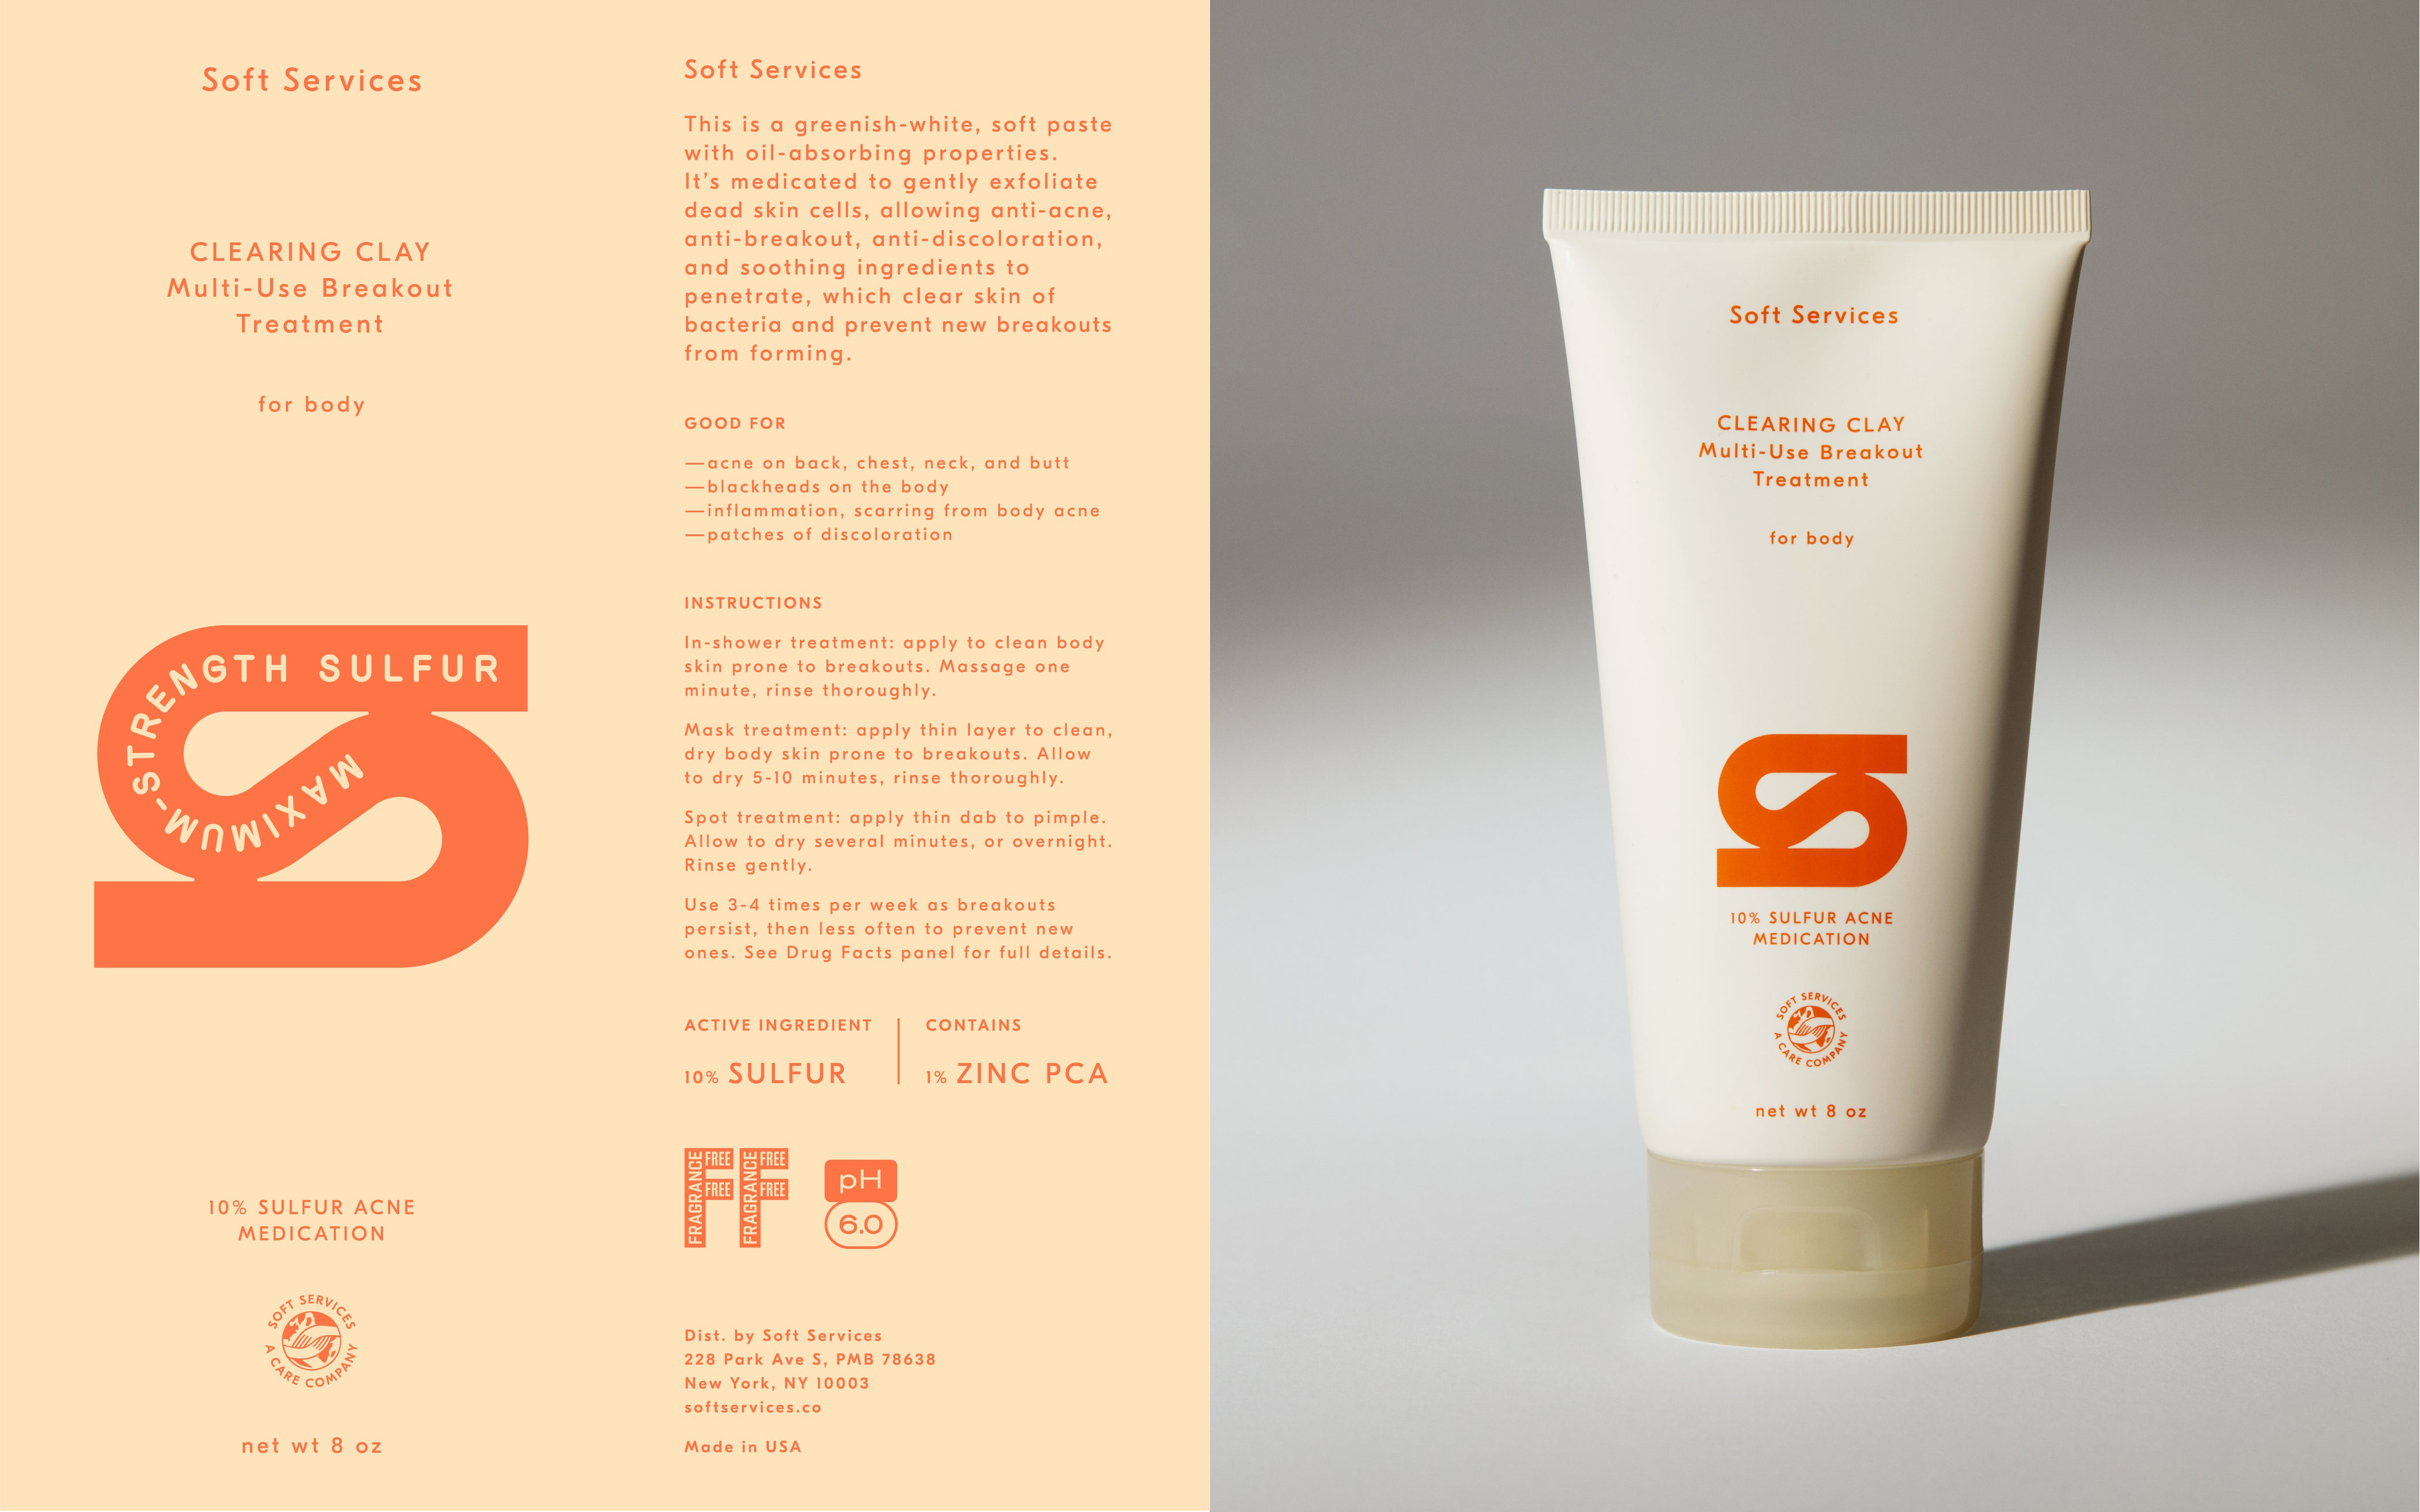 Silkscreen printed skincare tube packaging design by Decade for New York-based Soft Services